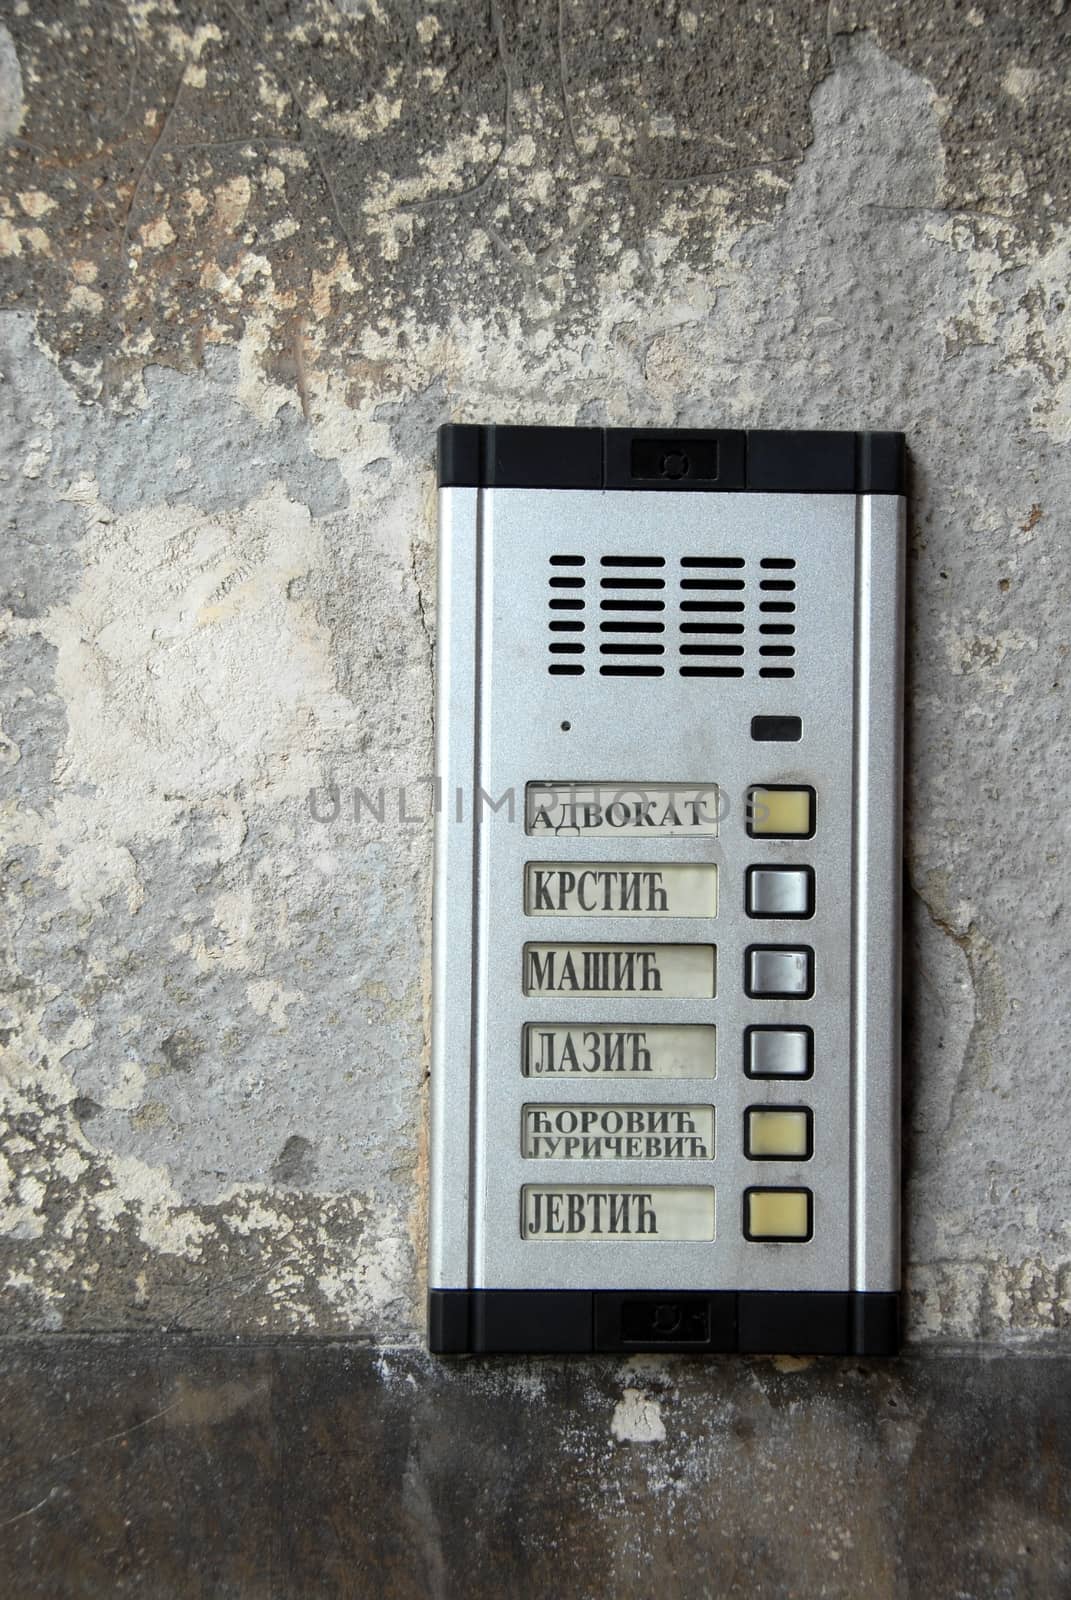 metallic interphone on old wall with serbian surnames